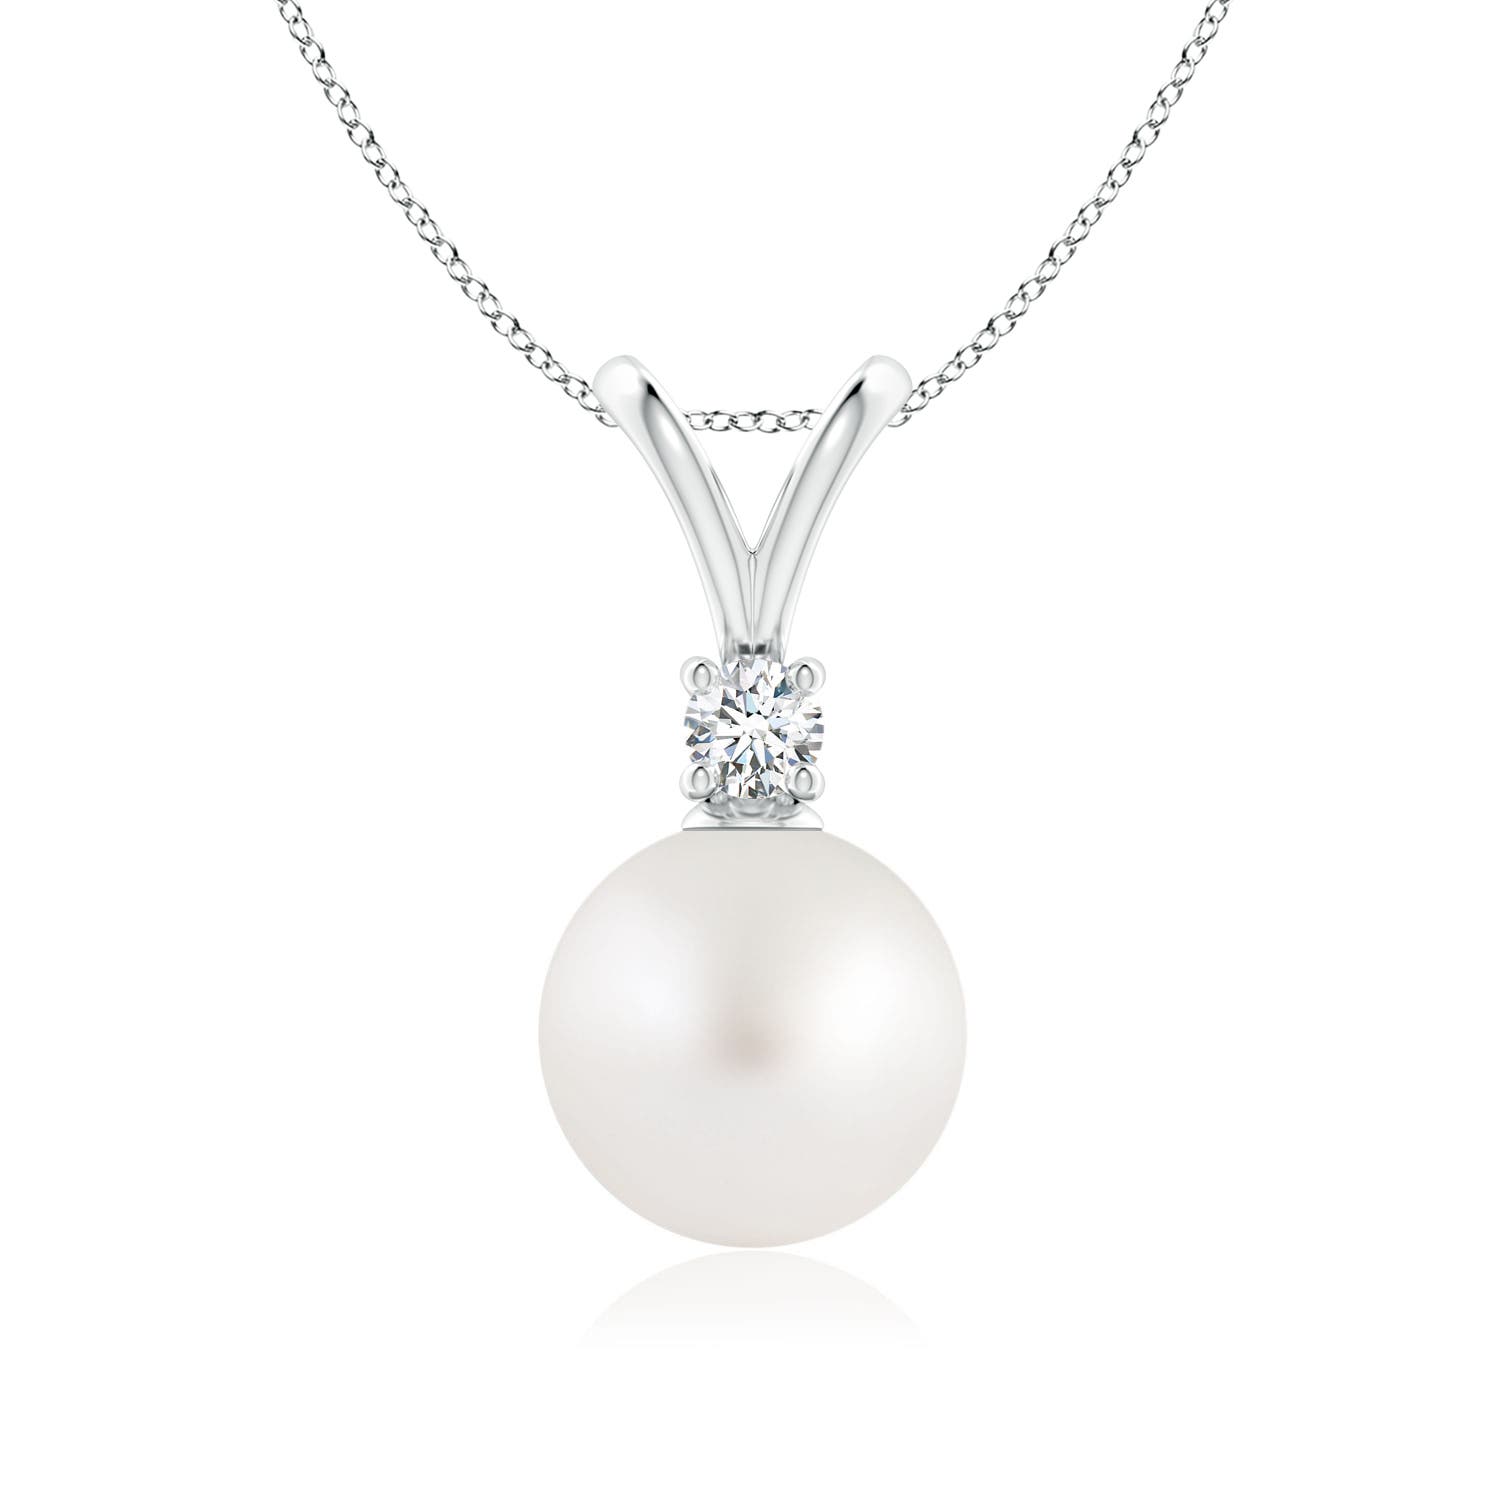 AA - South Sea Cultured Pearl / 5.36 CT / 14 KT White Gold